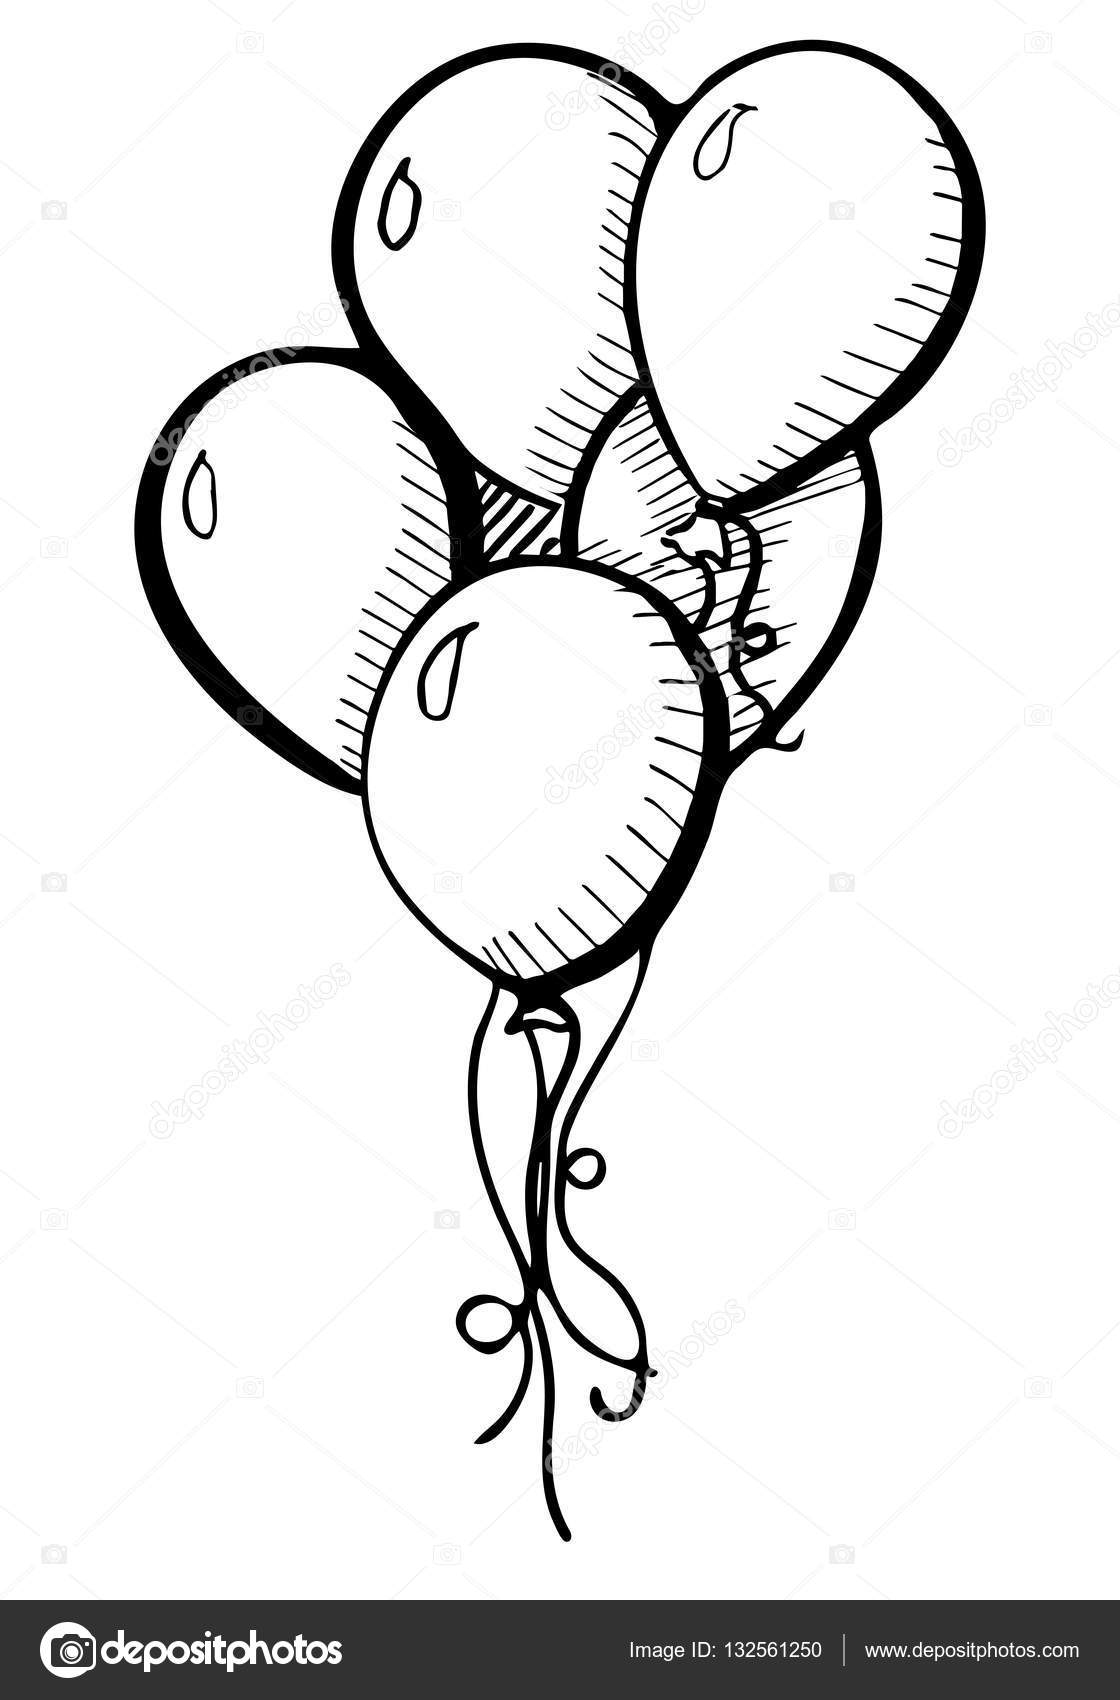 Group of balloons on a string. Hand drawn, isolated on a white